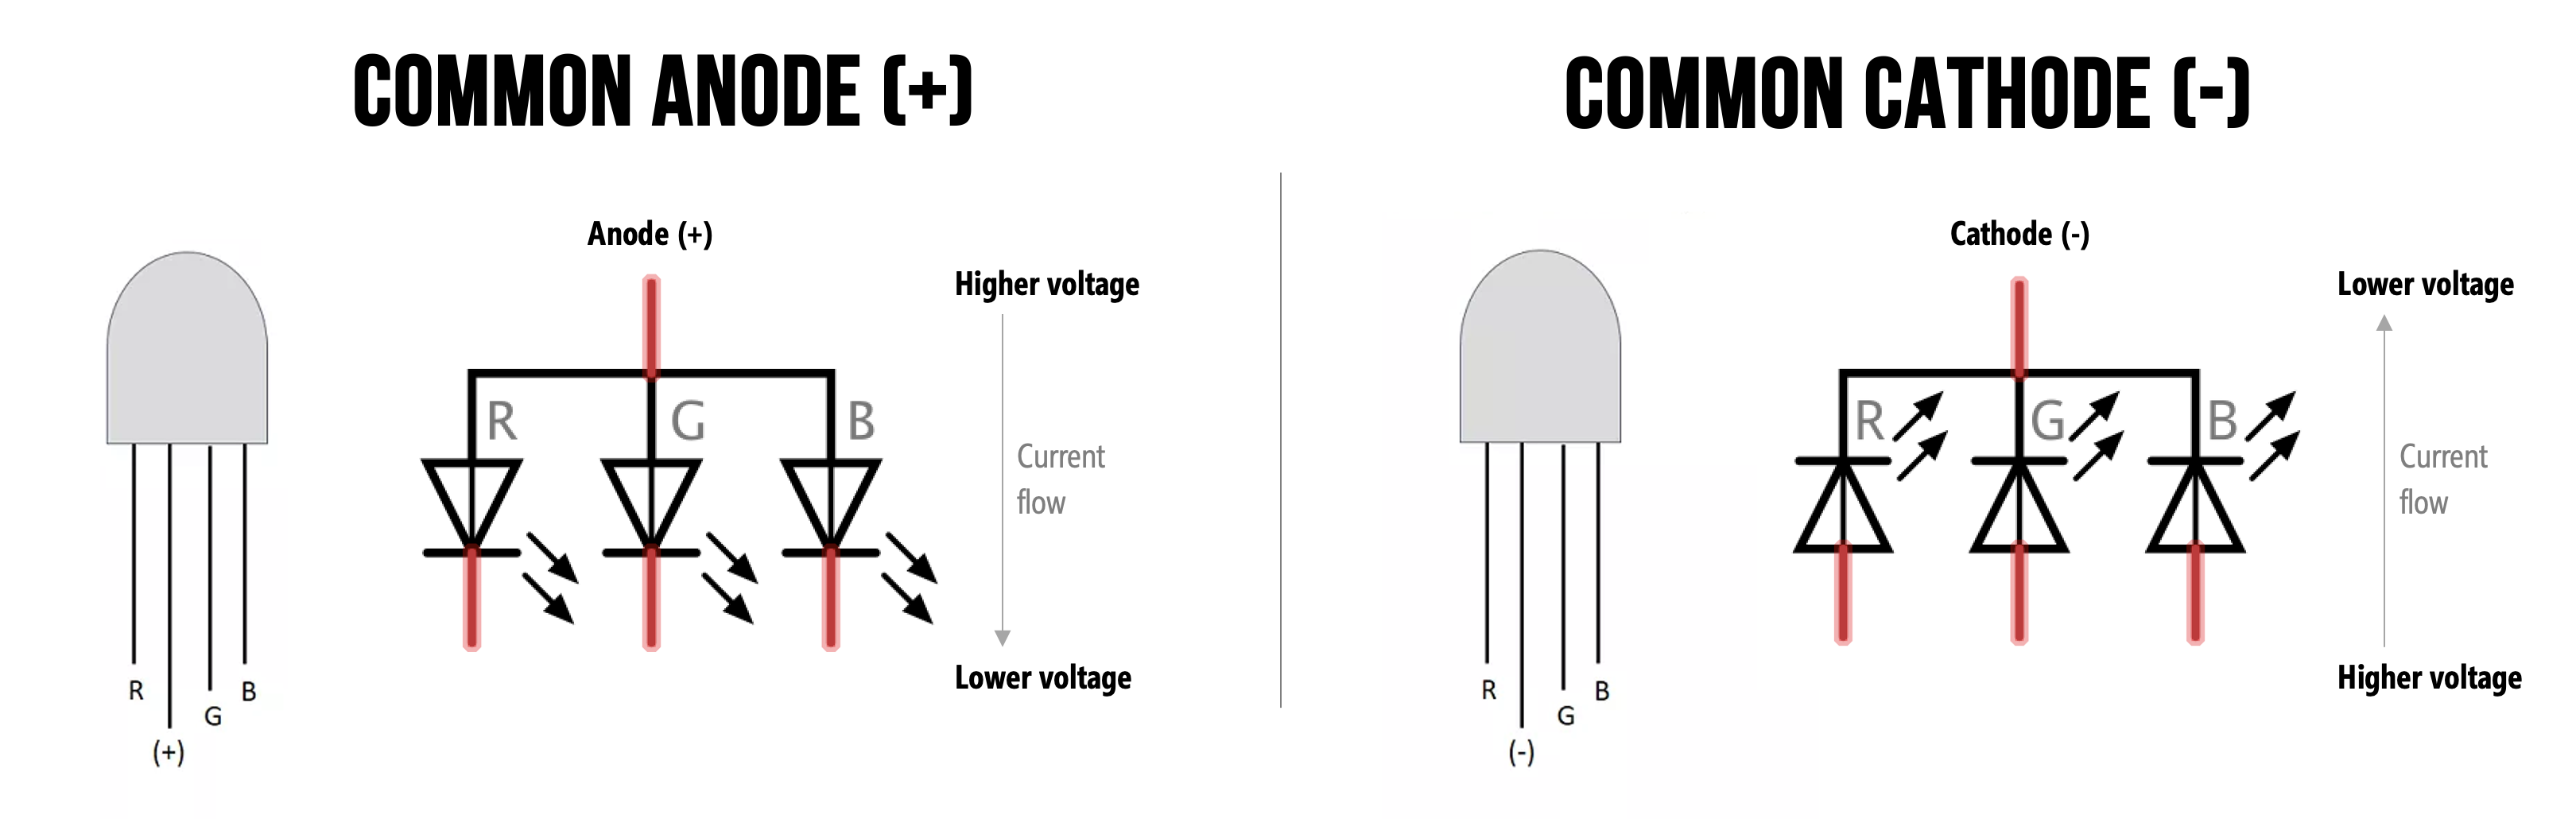 Image showing schematics of a common anode RGB LED and a common cathode RGB LED. With the common anode, the second leg of the RGB LED needs to be hooked up to the higher voltage source. With a common cathode, the second leg of the RGB LED needs to be hooked up to the lower voltage